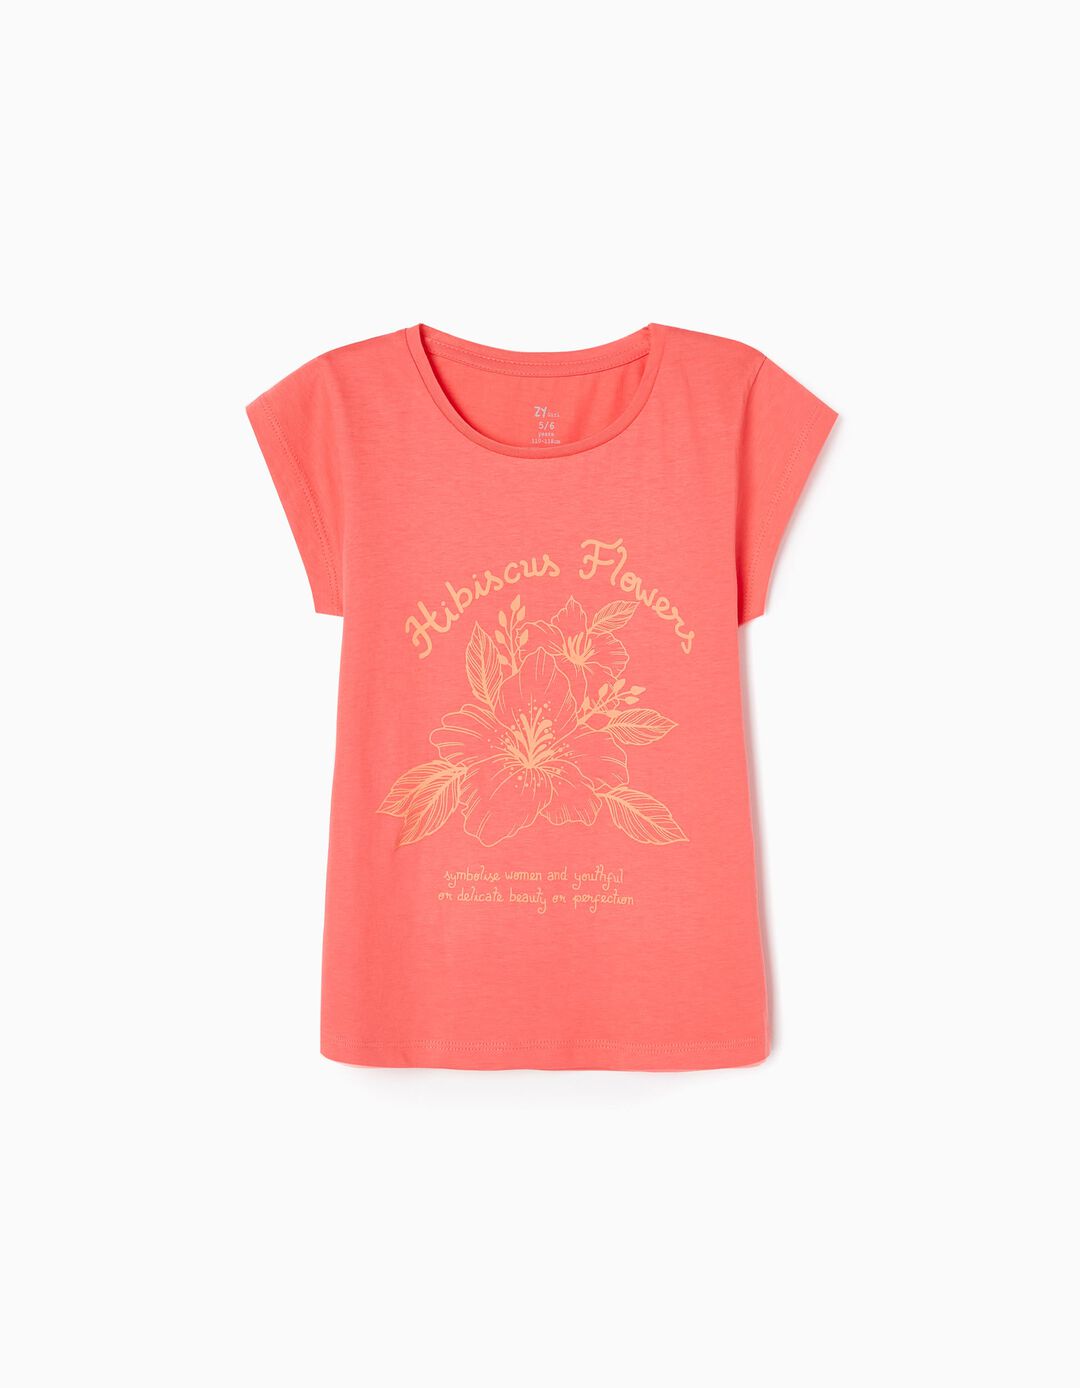 Cotton T-shirt for Girls 'Hibiscus Flower', Coral